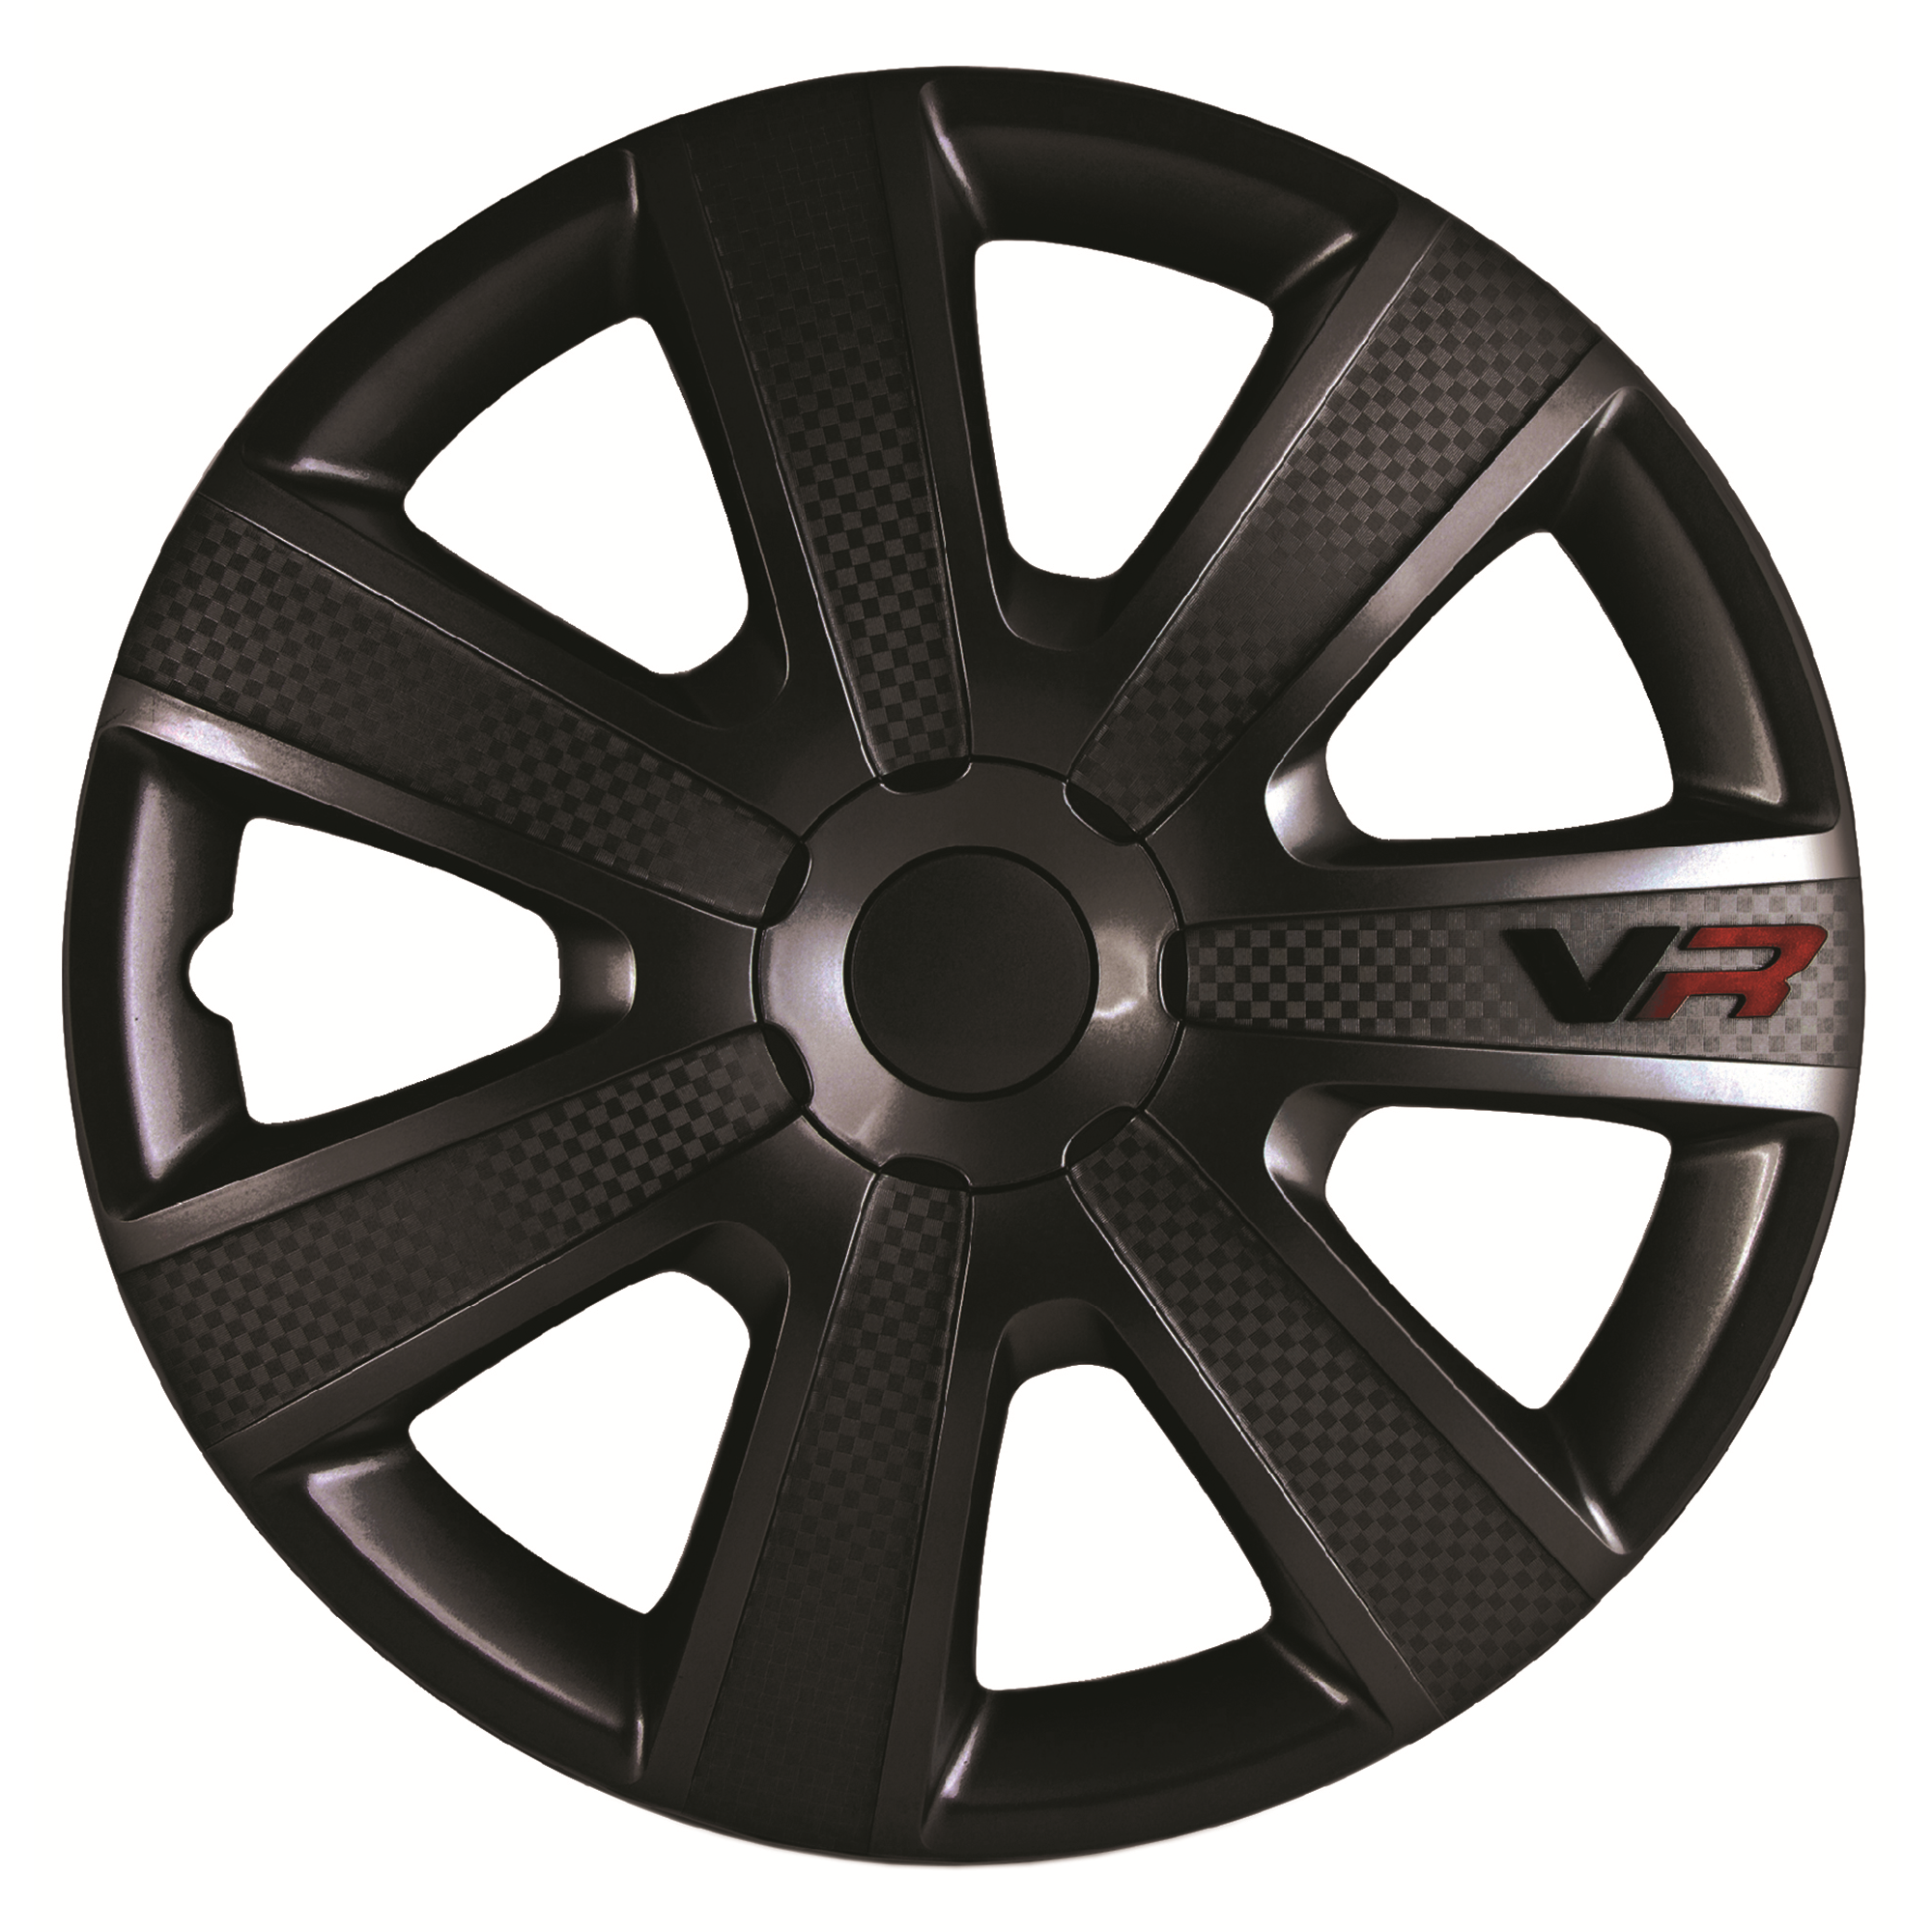 14 Inch Hubcaps Wheel Cover F